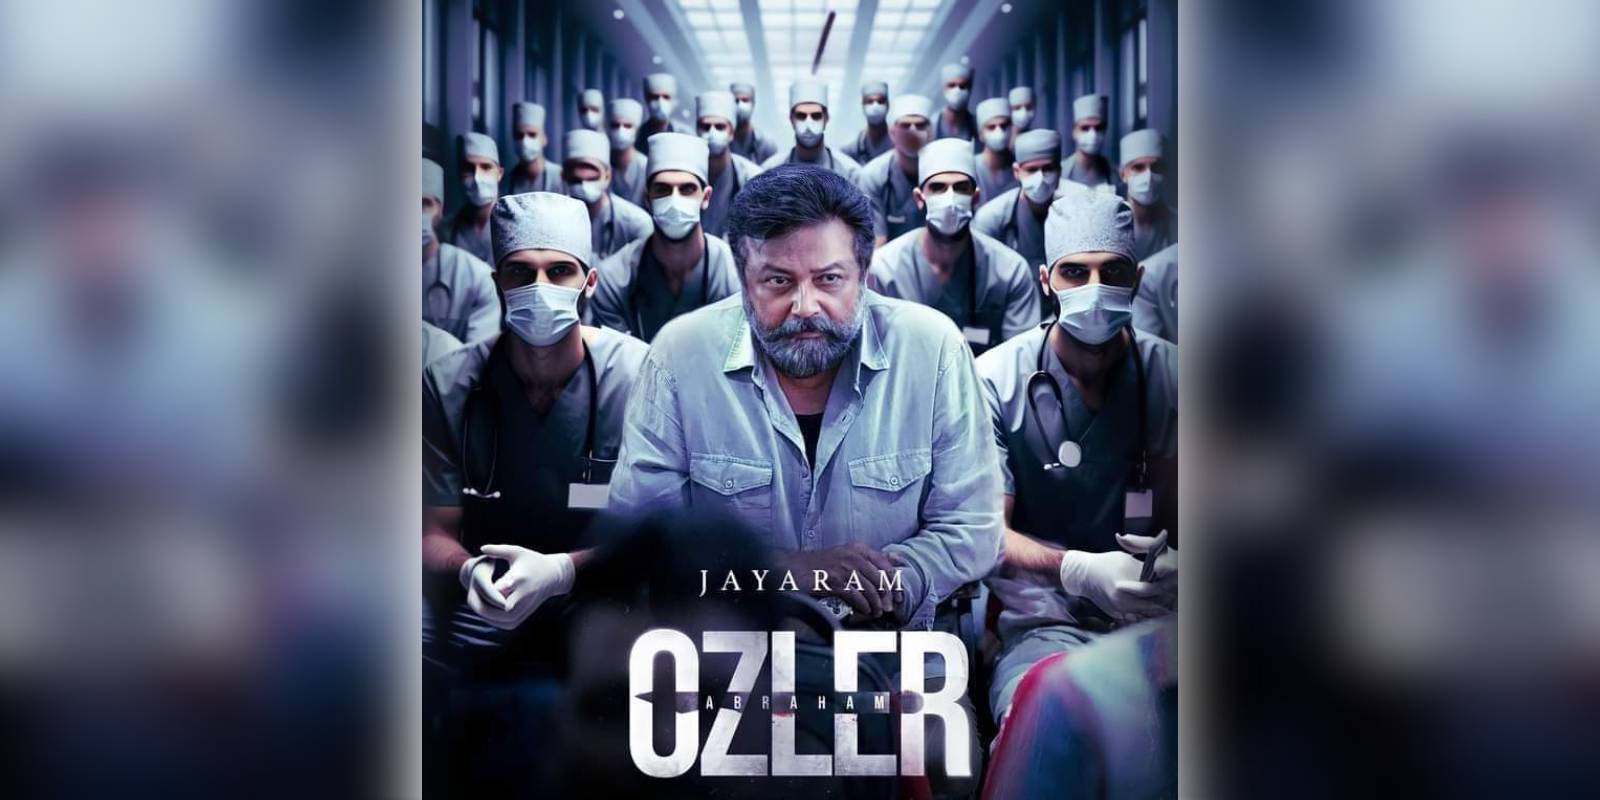 A poster of the film Abraham Ozler